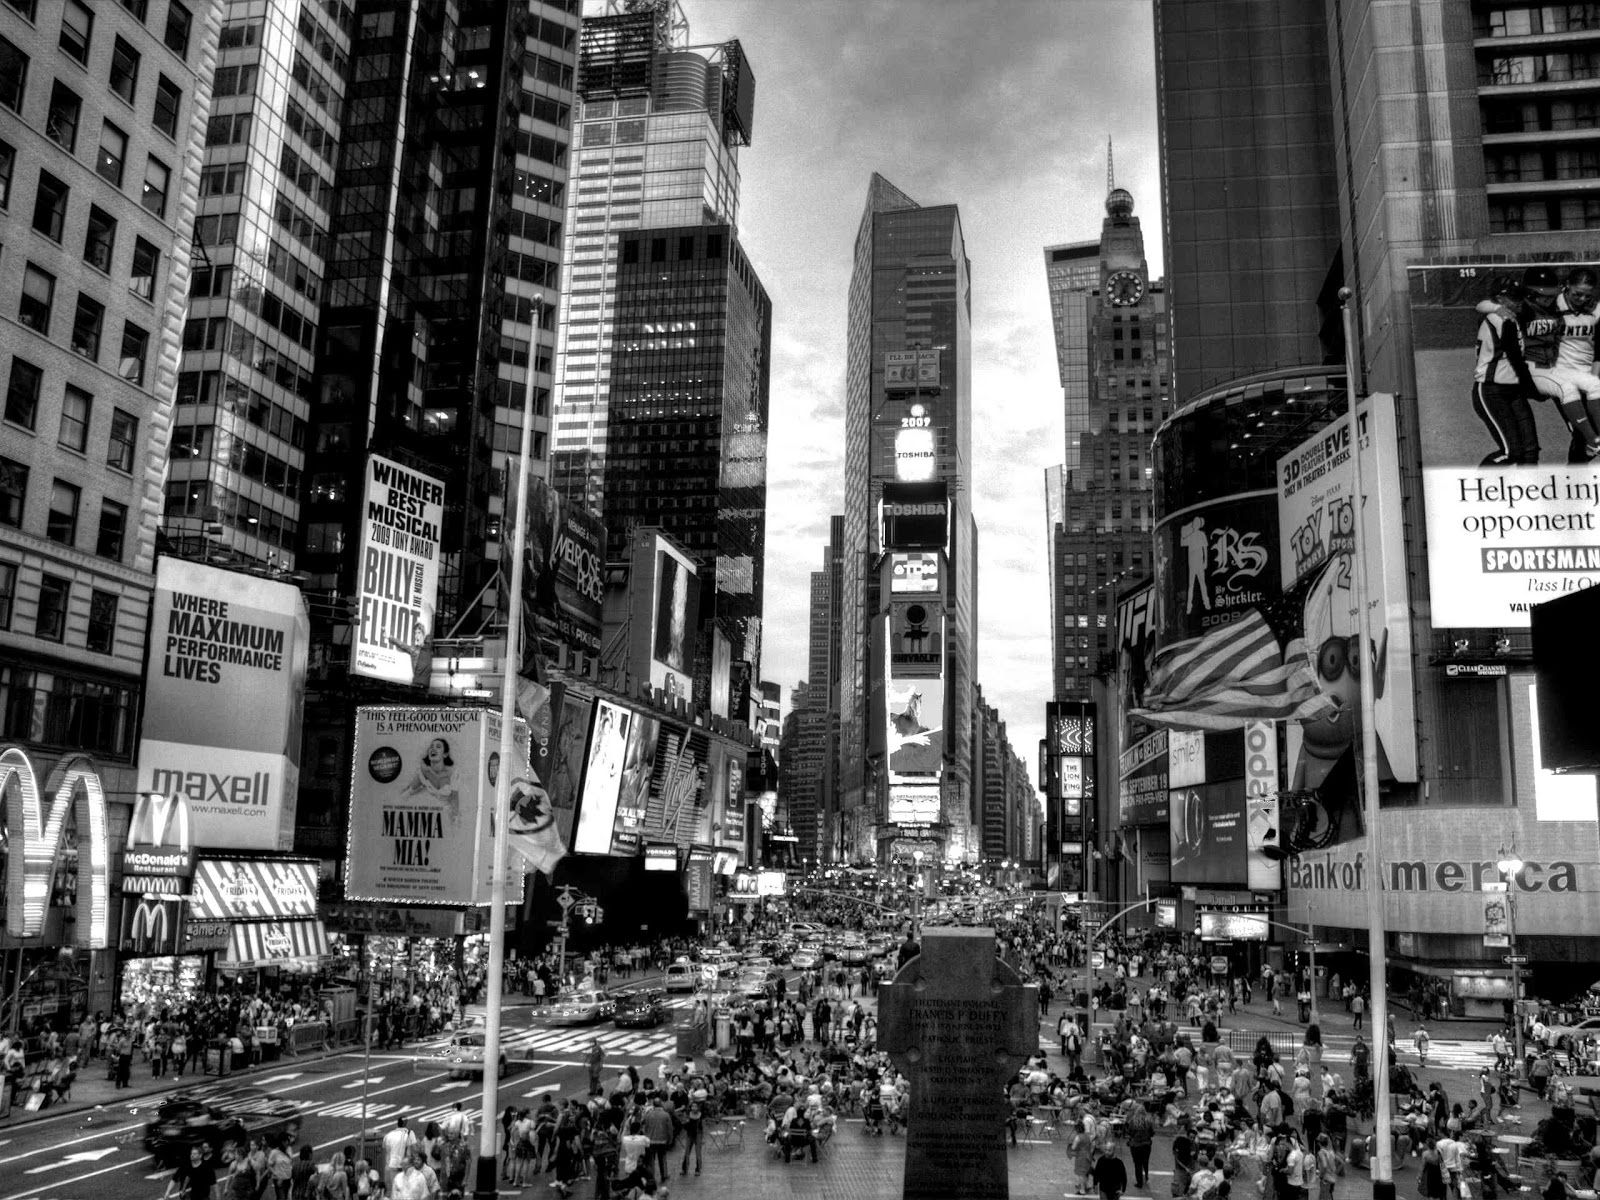 Times Square At Night Black and White - wallpaper.